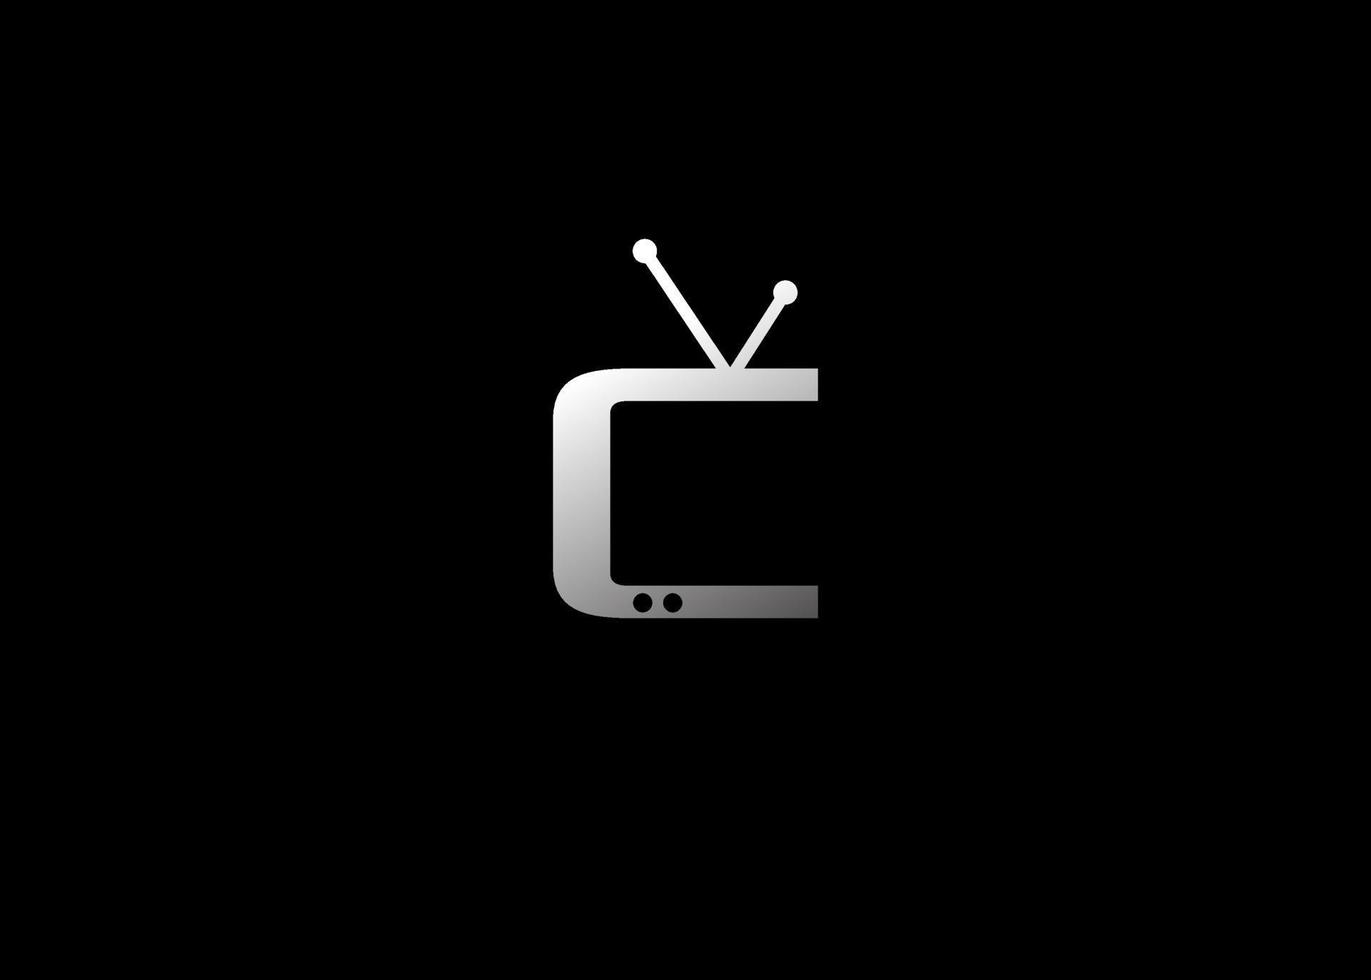 beautiful simple vector letter C with television logo, this is perfect logo for your company name or brand product